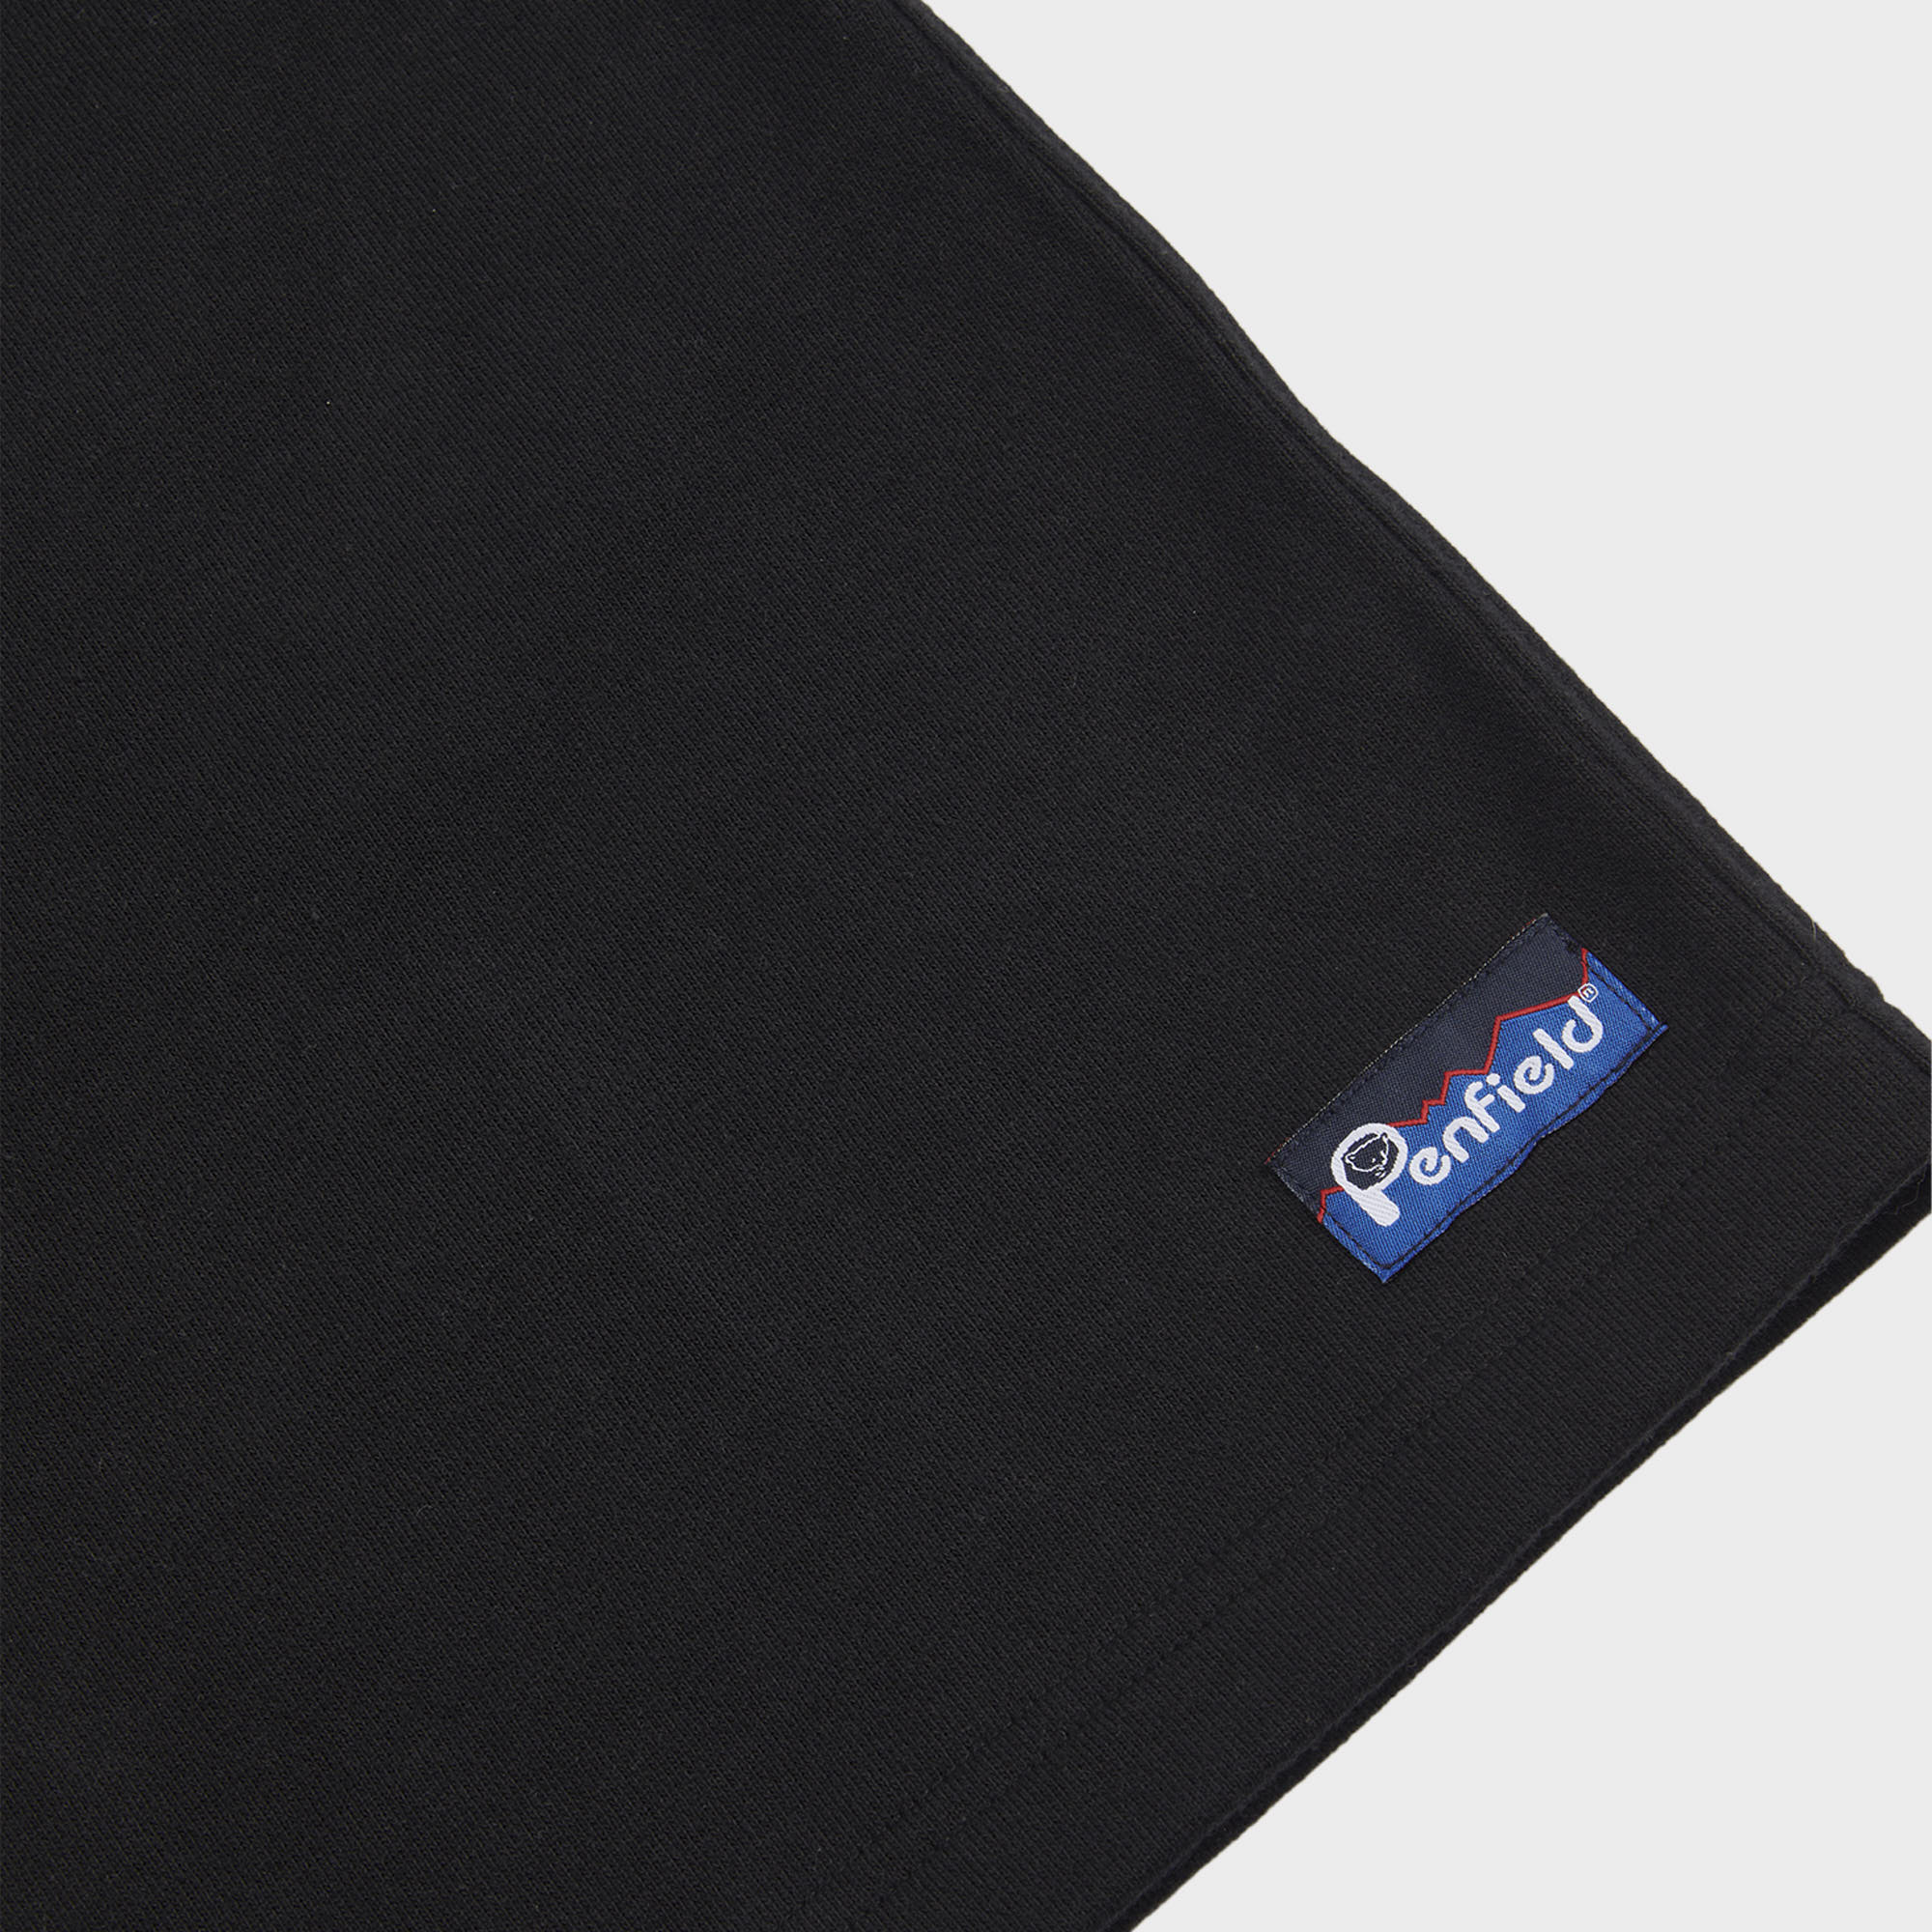 Relaxed Fit Original Logo Shorts in Black